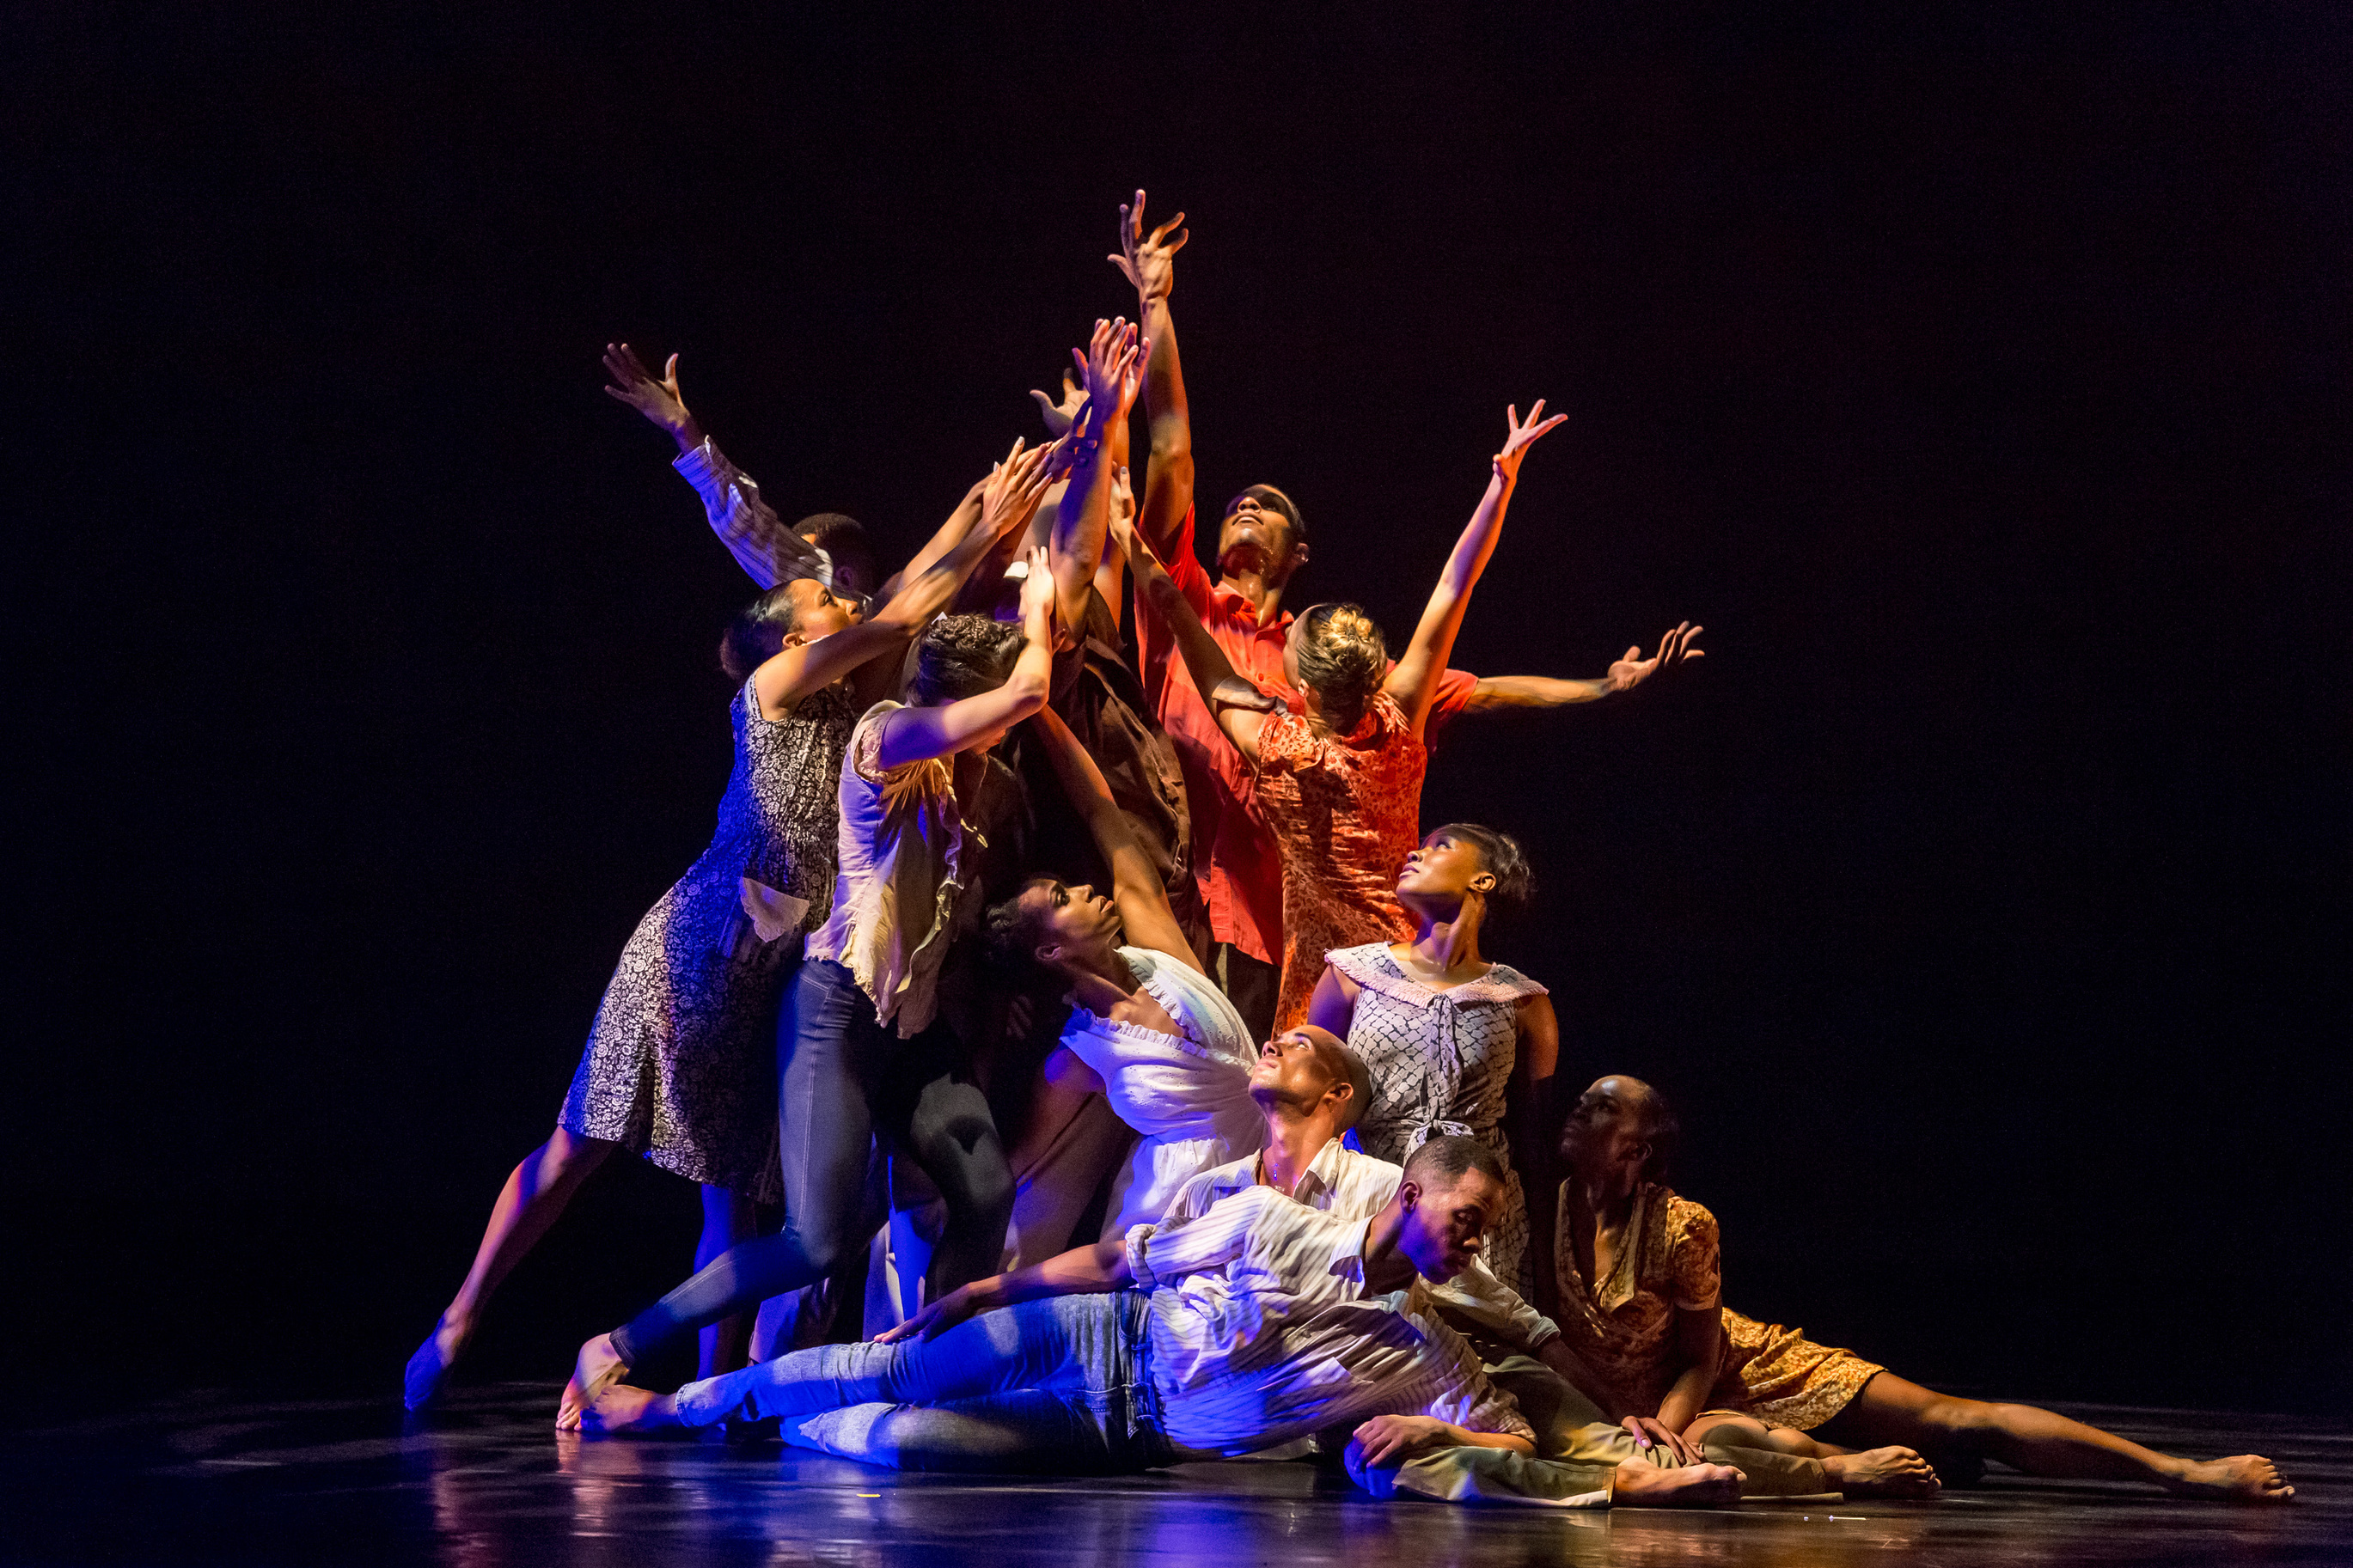 DBDT dancing Tribute by choreographer Matthew Rushing as photographed by Sharen Bradford-The Dancing Image